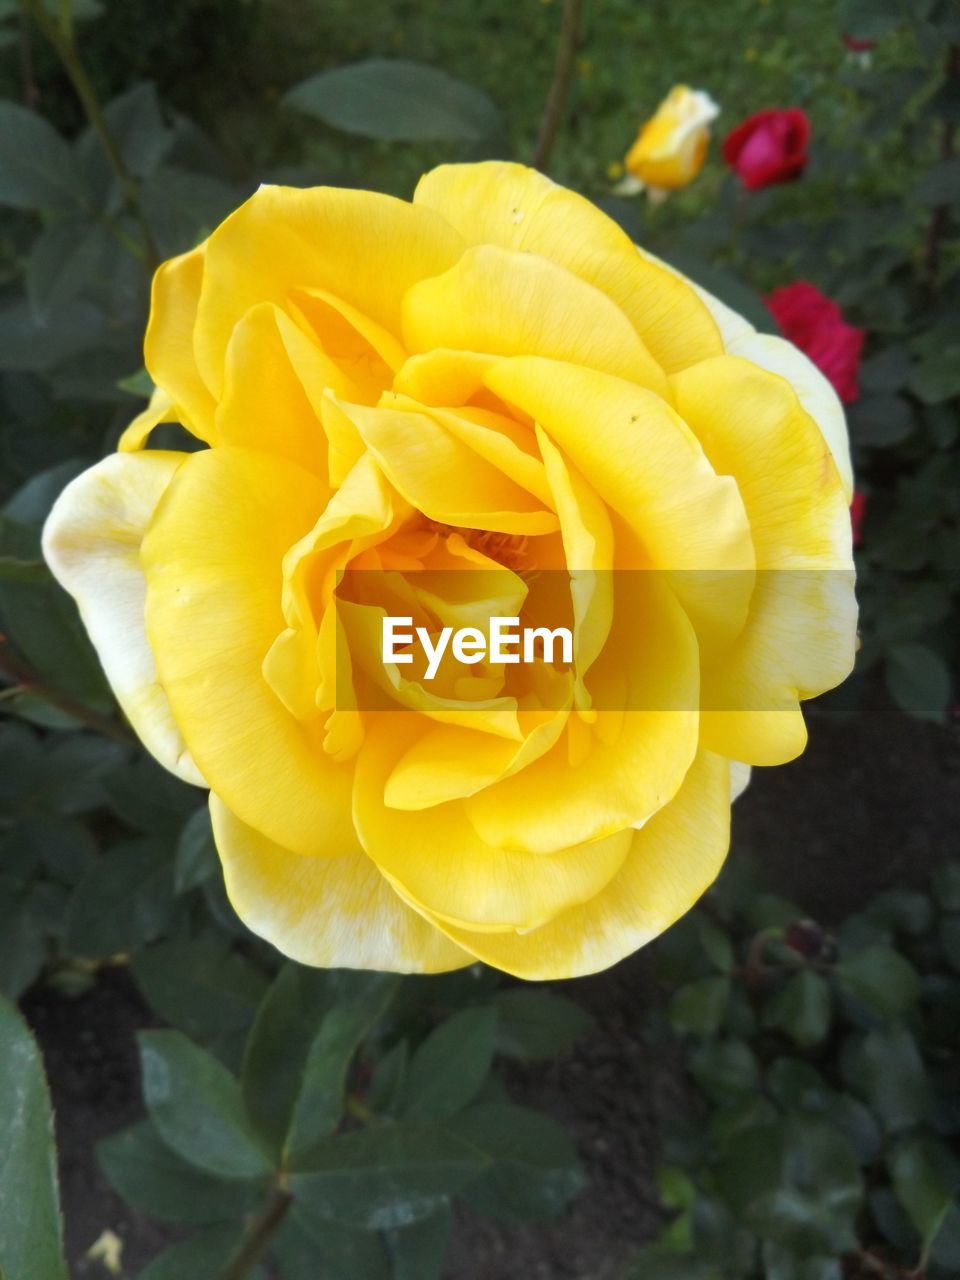 CLOSE-UP OF YELLOW ROSE BLOOMING OUTDOORS